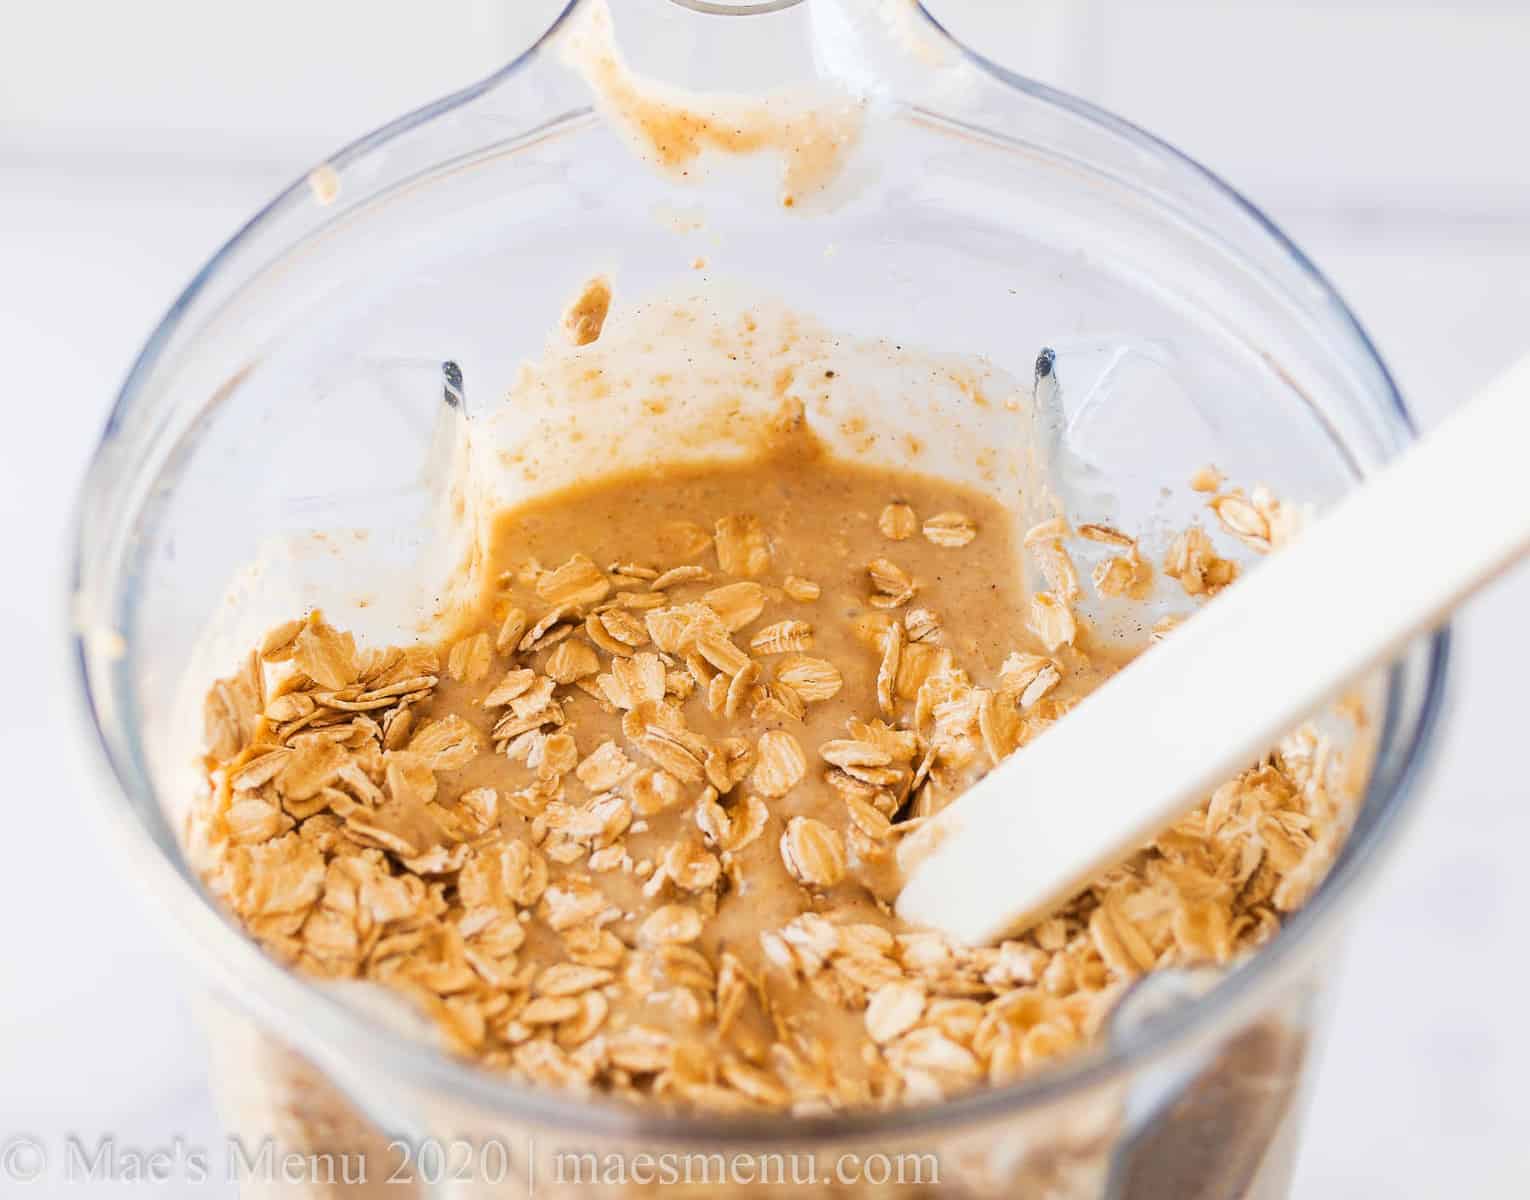 A blender full of banana oatmeal batter with oats mixed in